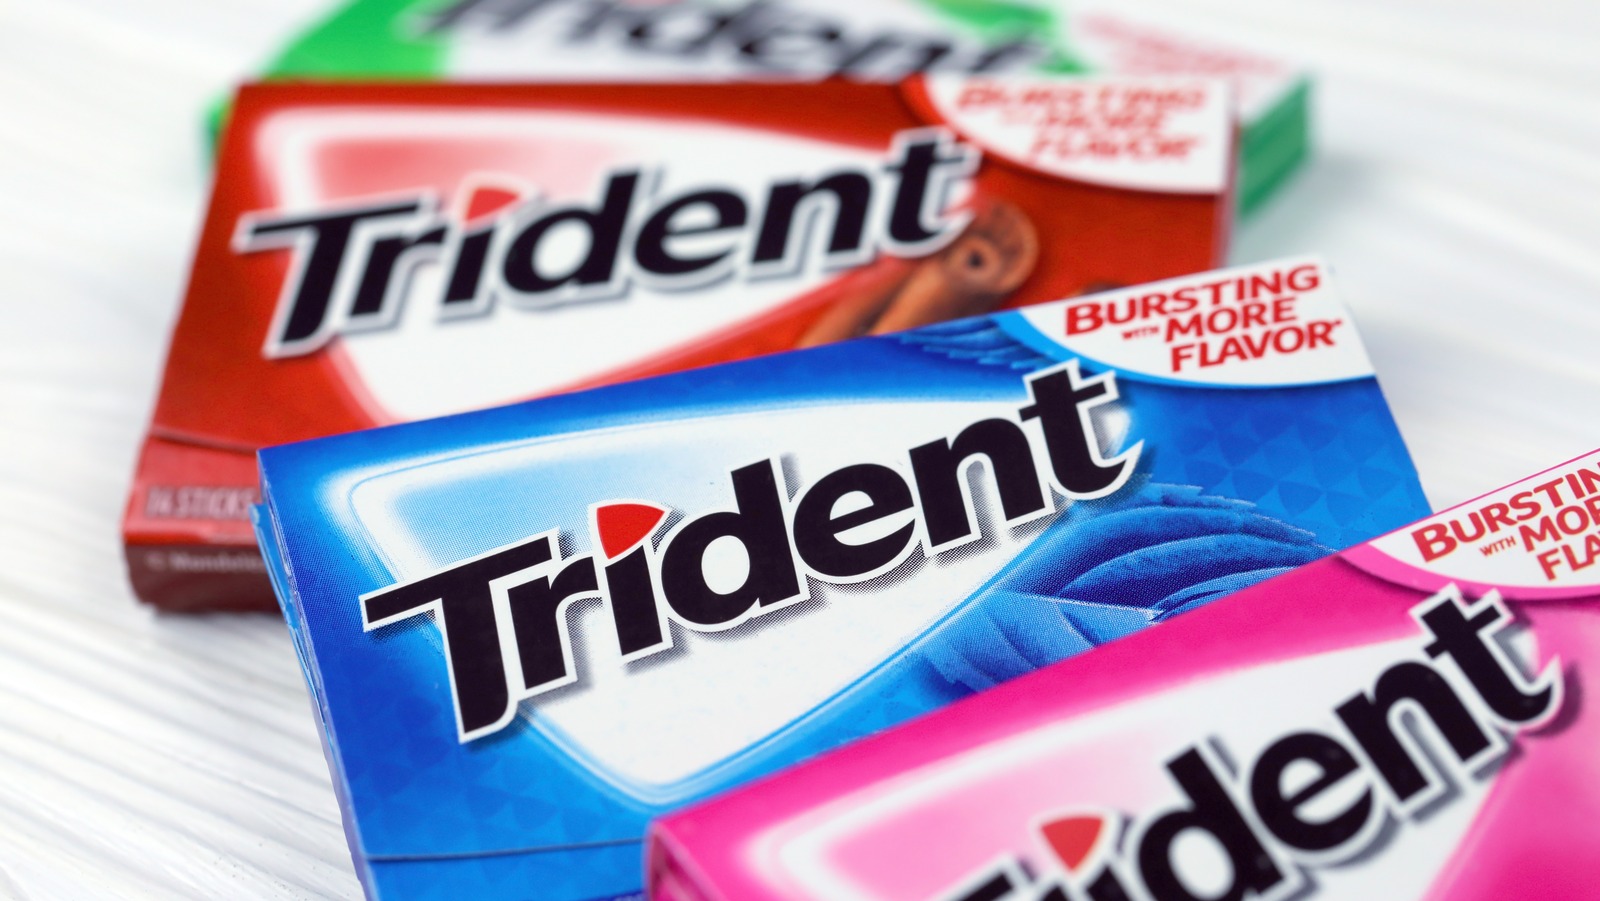 Every Trident Flavor Ranked From Worst To Best